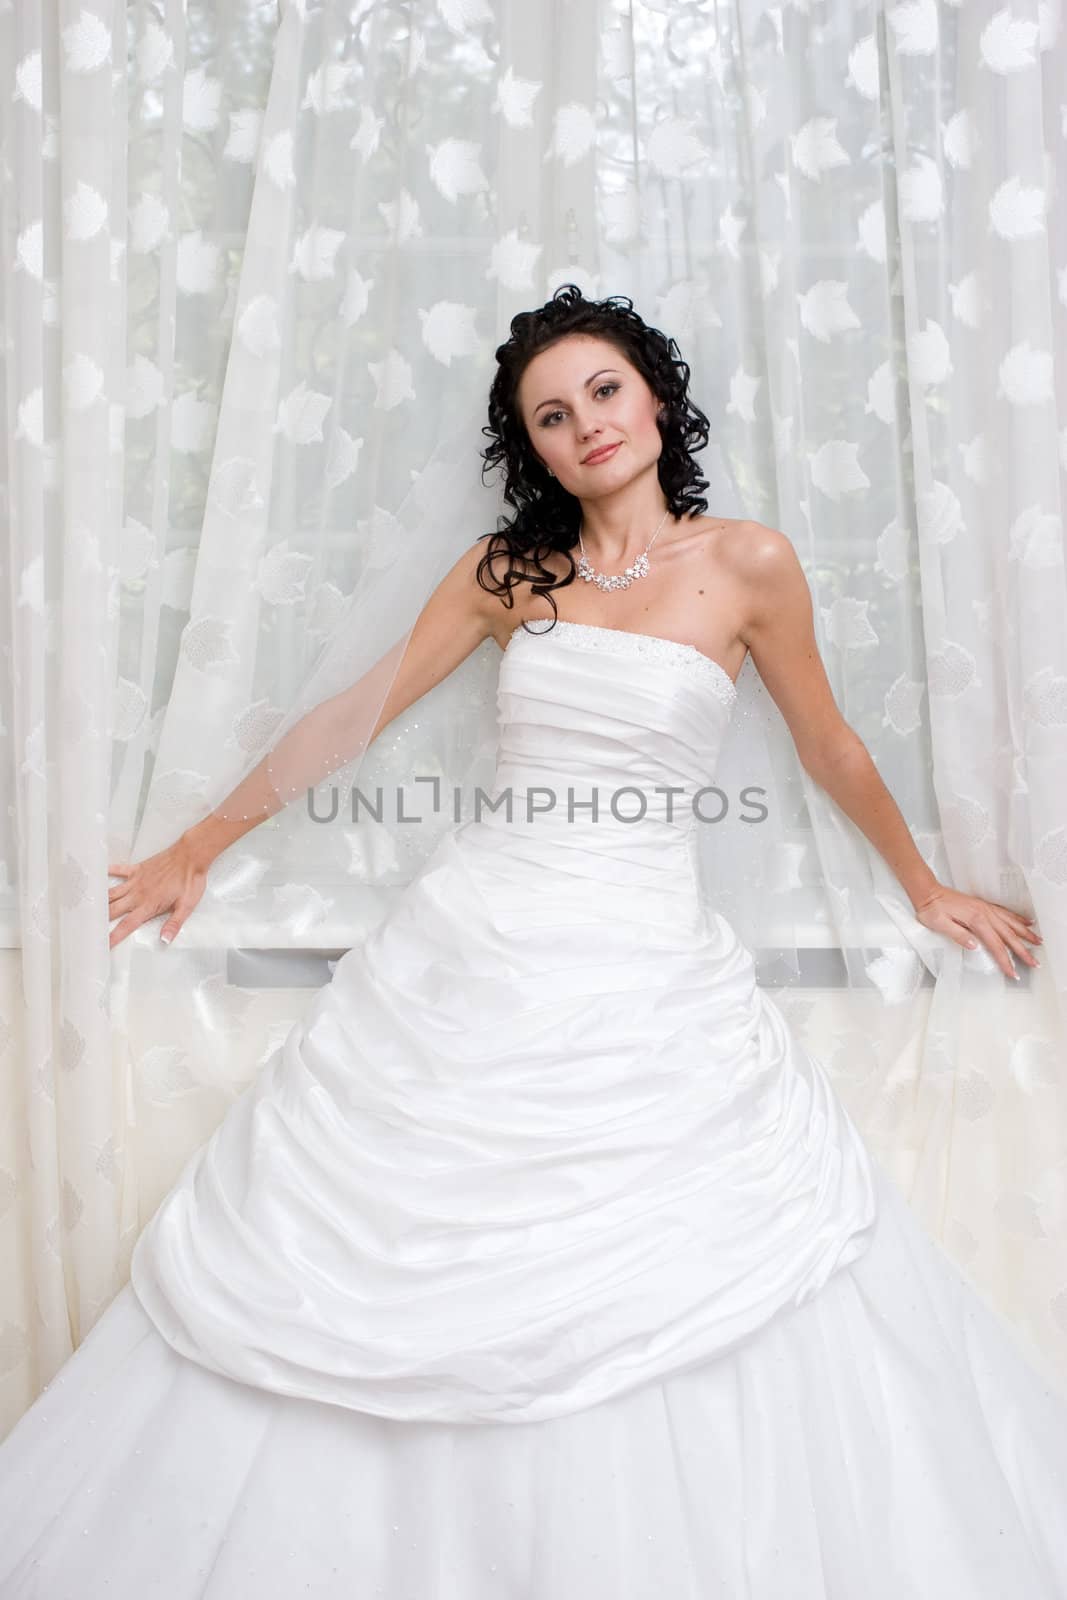 buautiful girl in wedding dress stands by the window